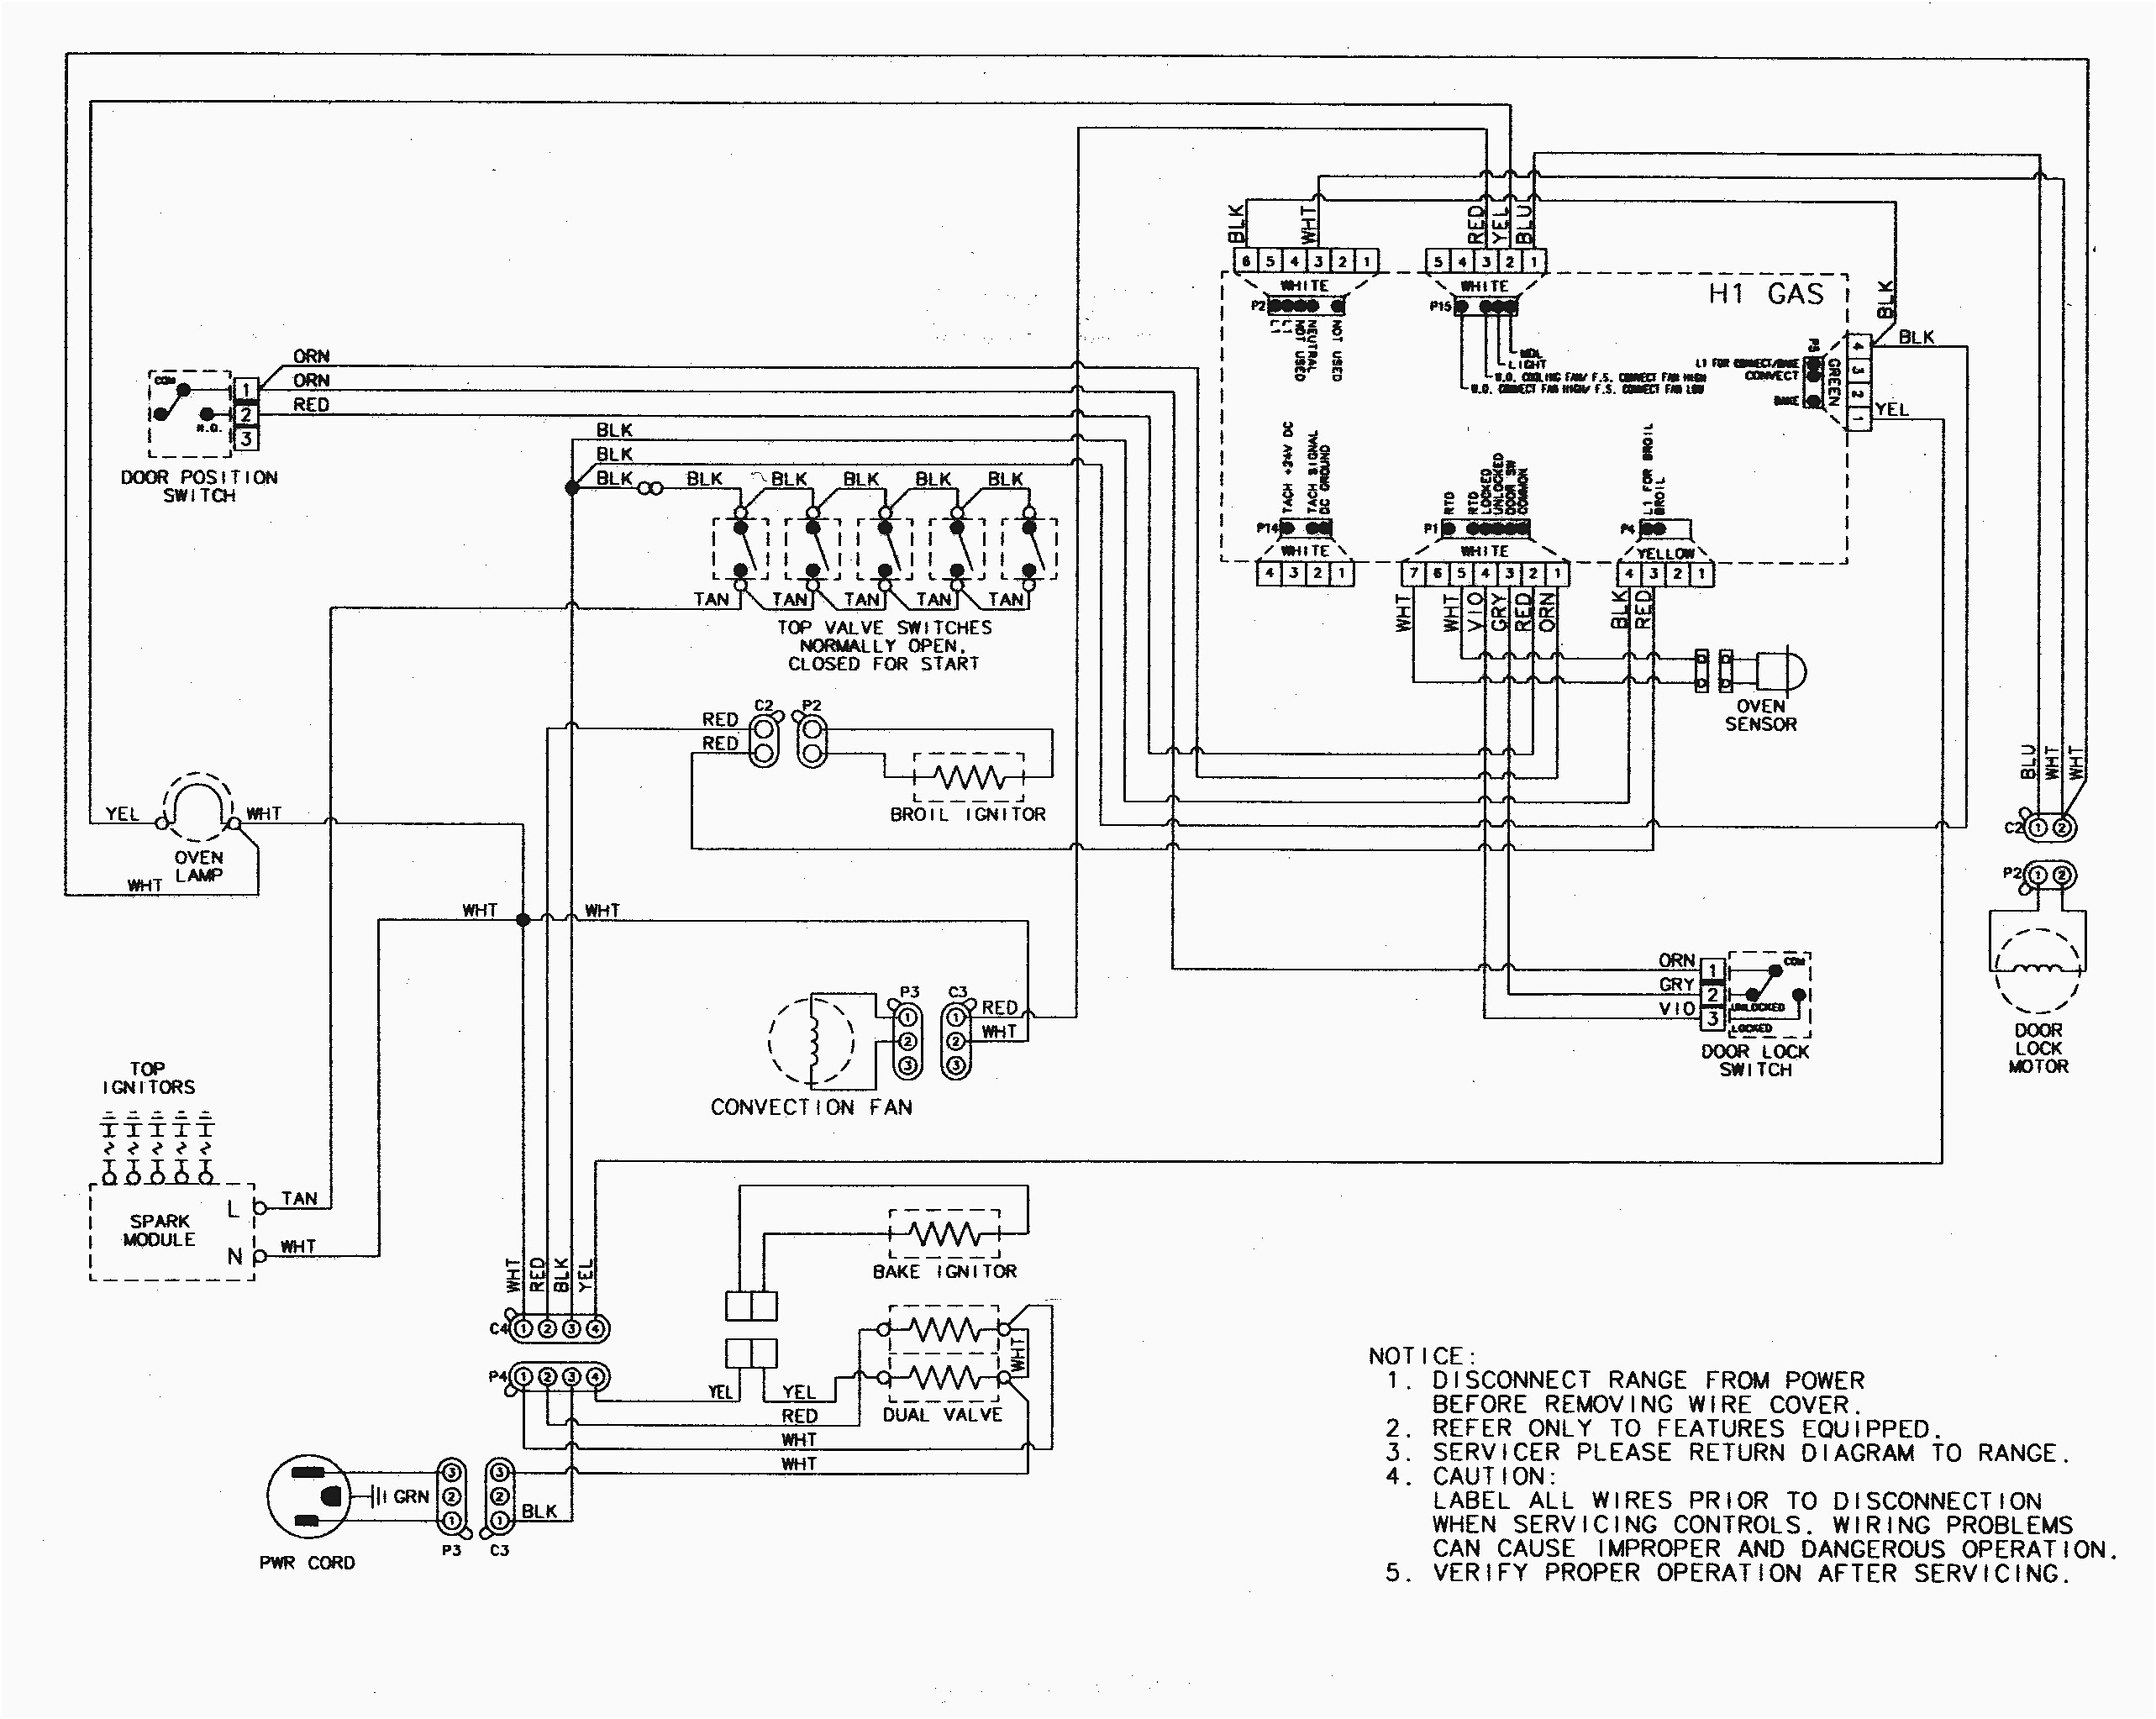 Wiring Diagram How To Wire An Electric Cooker 2 F Fair